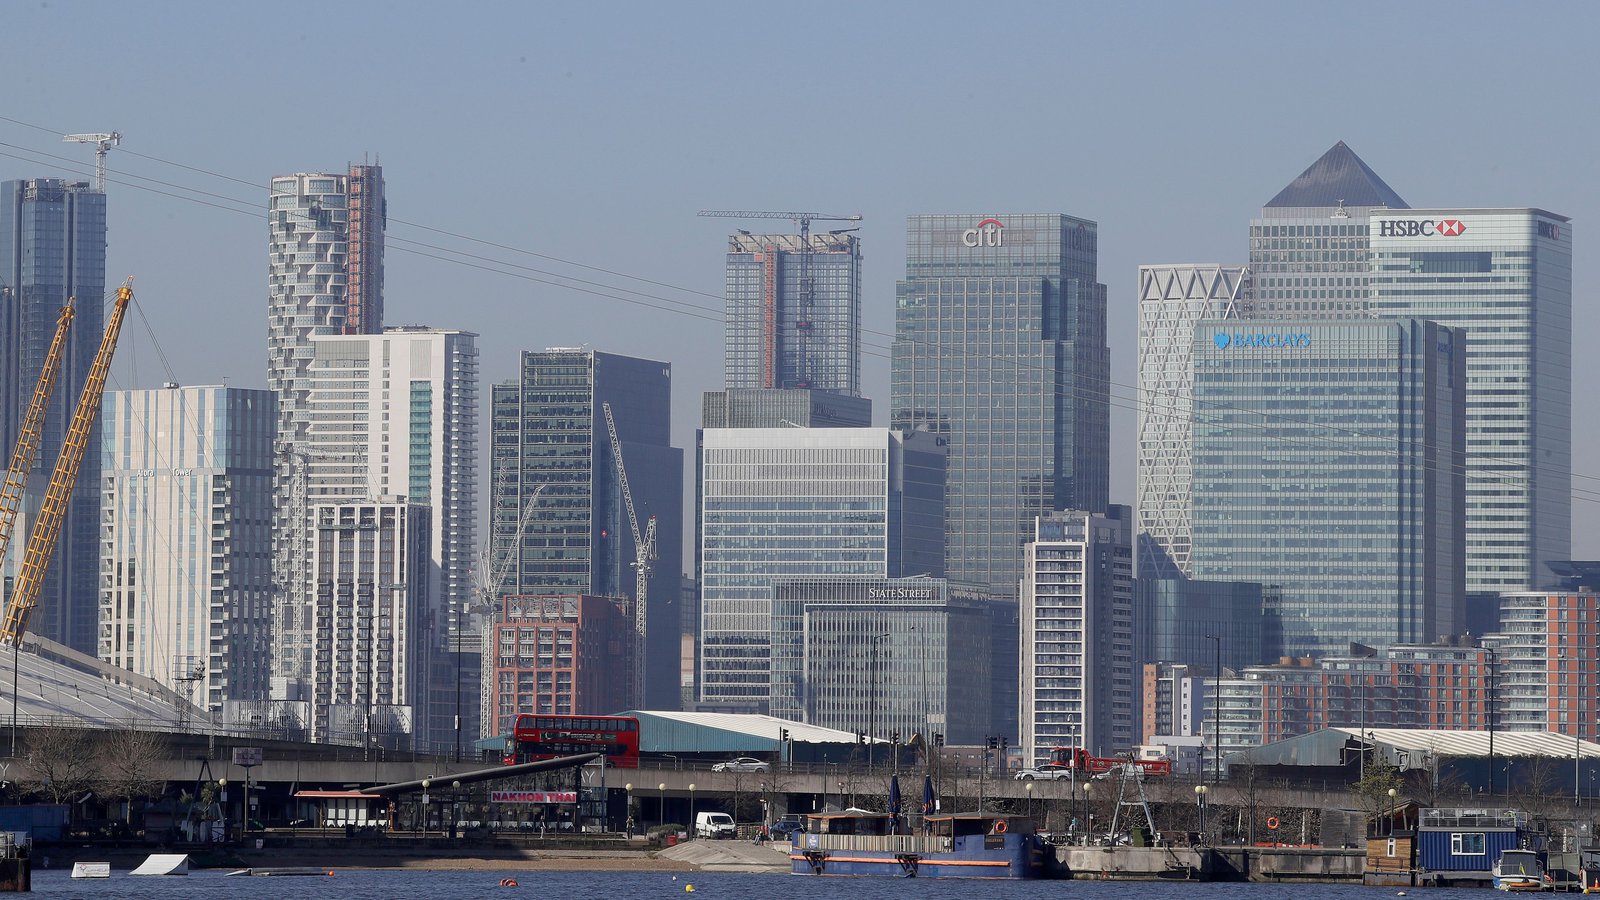 London's financial district in Canary Wharf